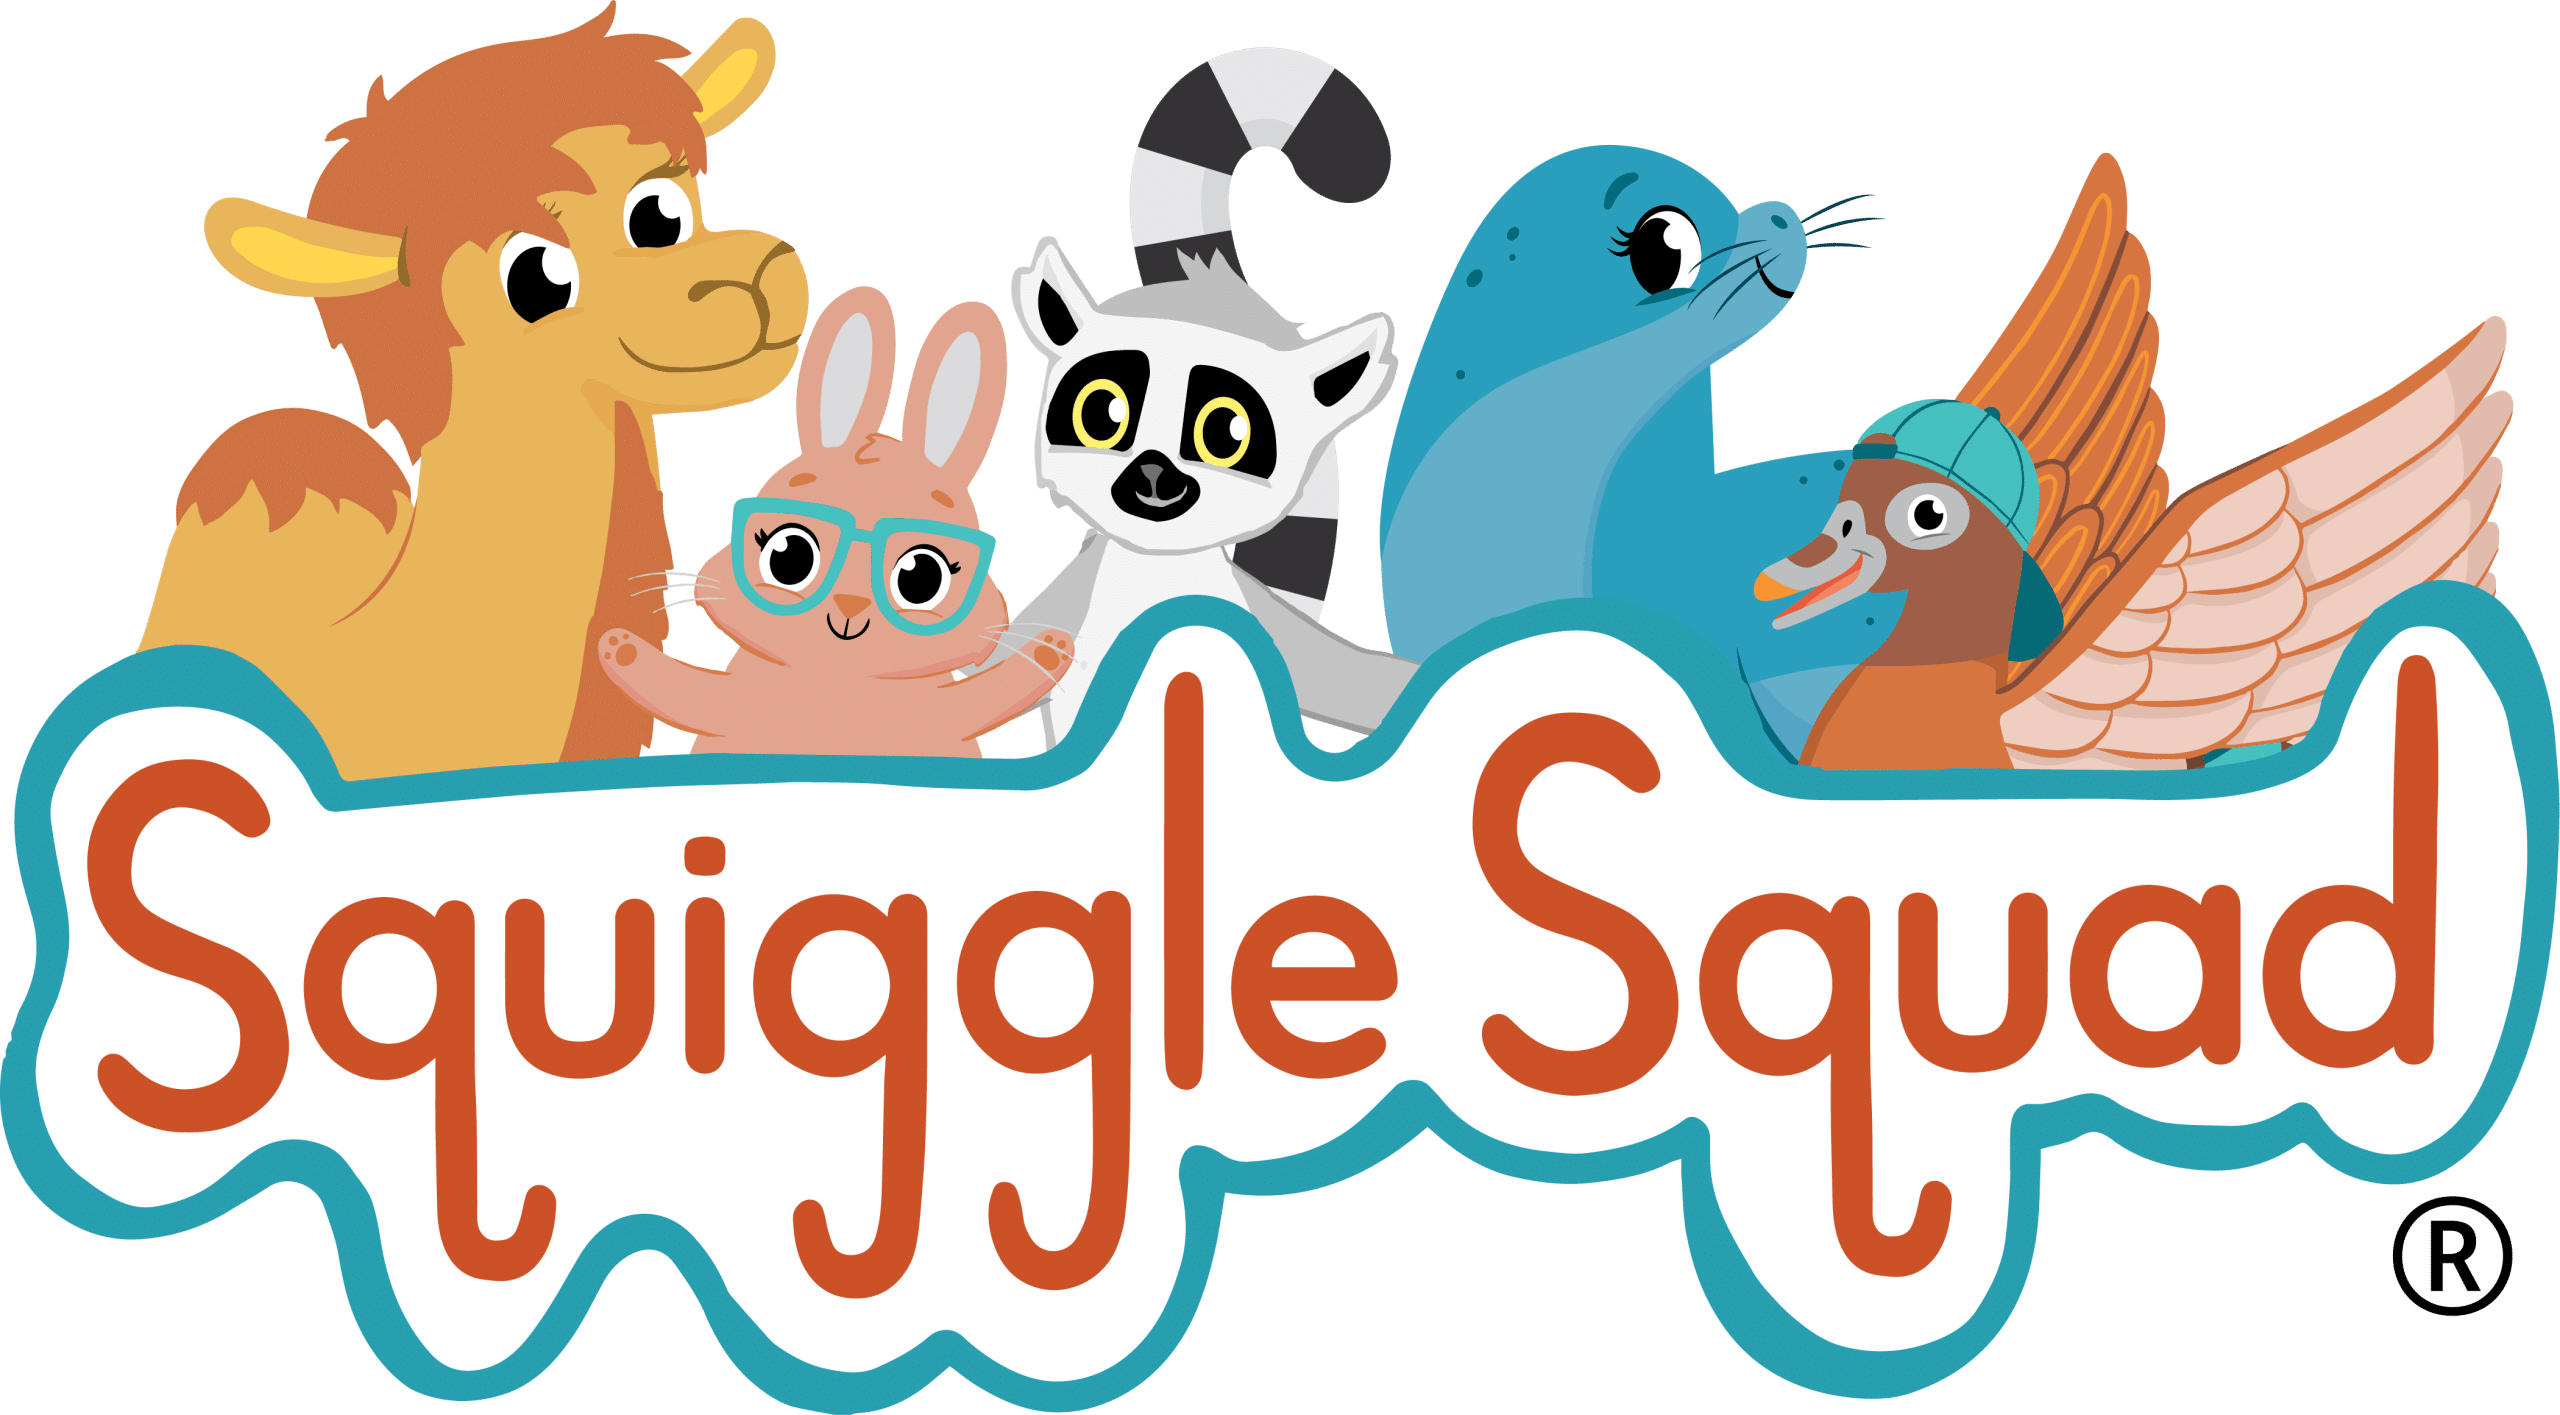 Illustration of five cartoon animals (a llama, rabbit, raccoon, seal, and duck) with the text "Squiggle Squad" in a playful font beneath them.